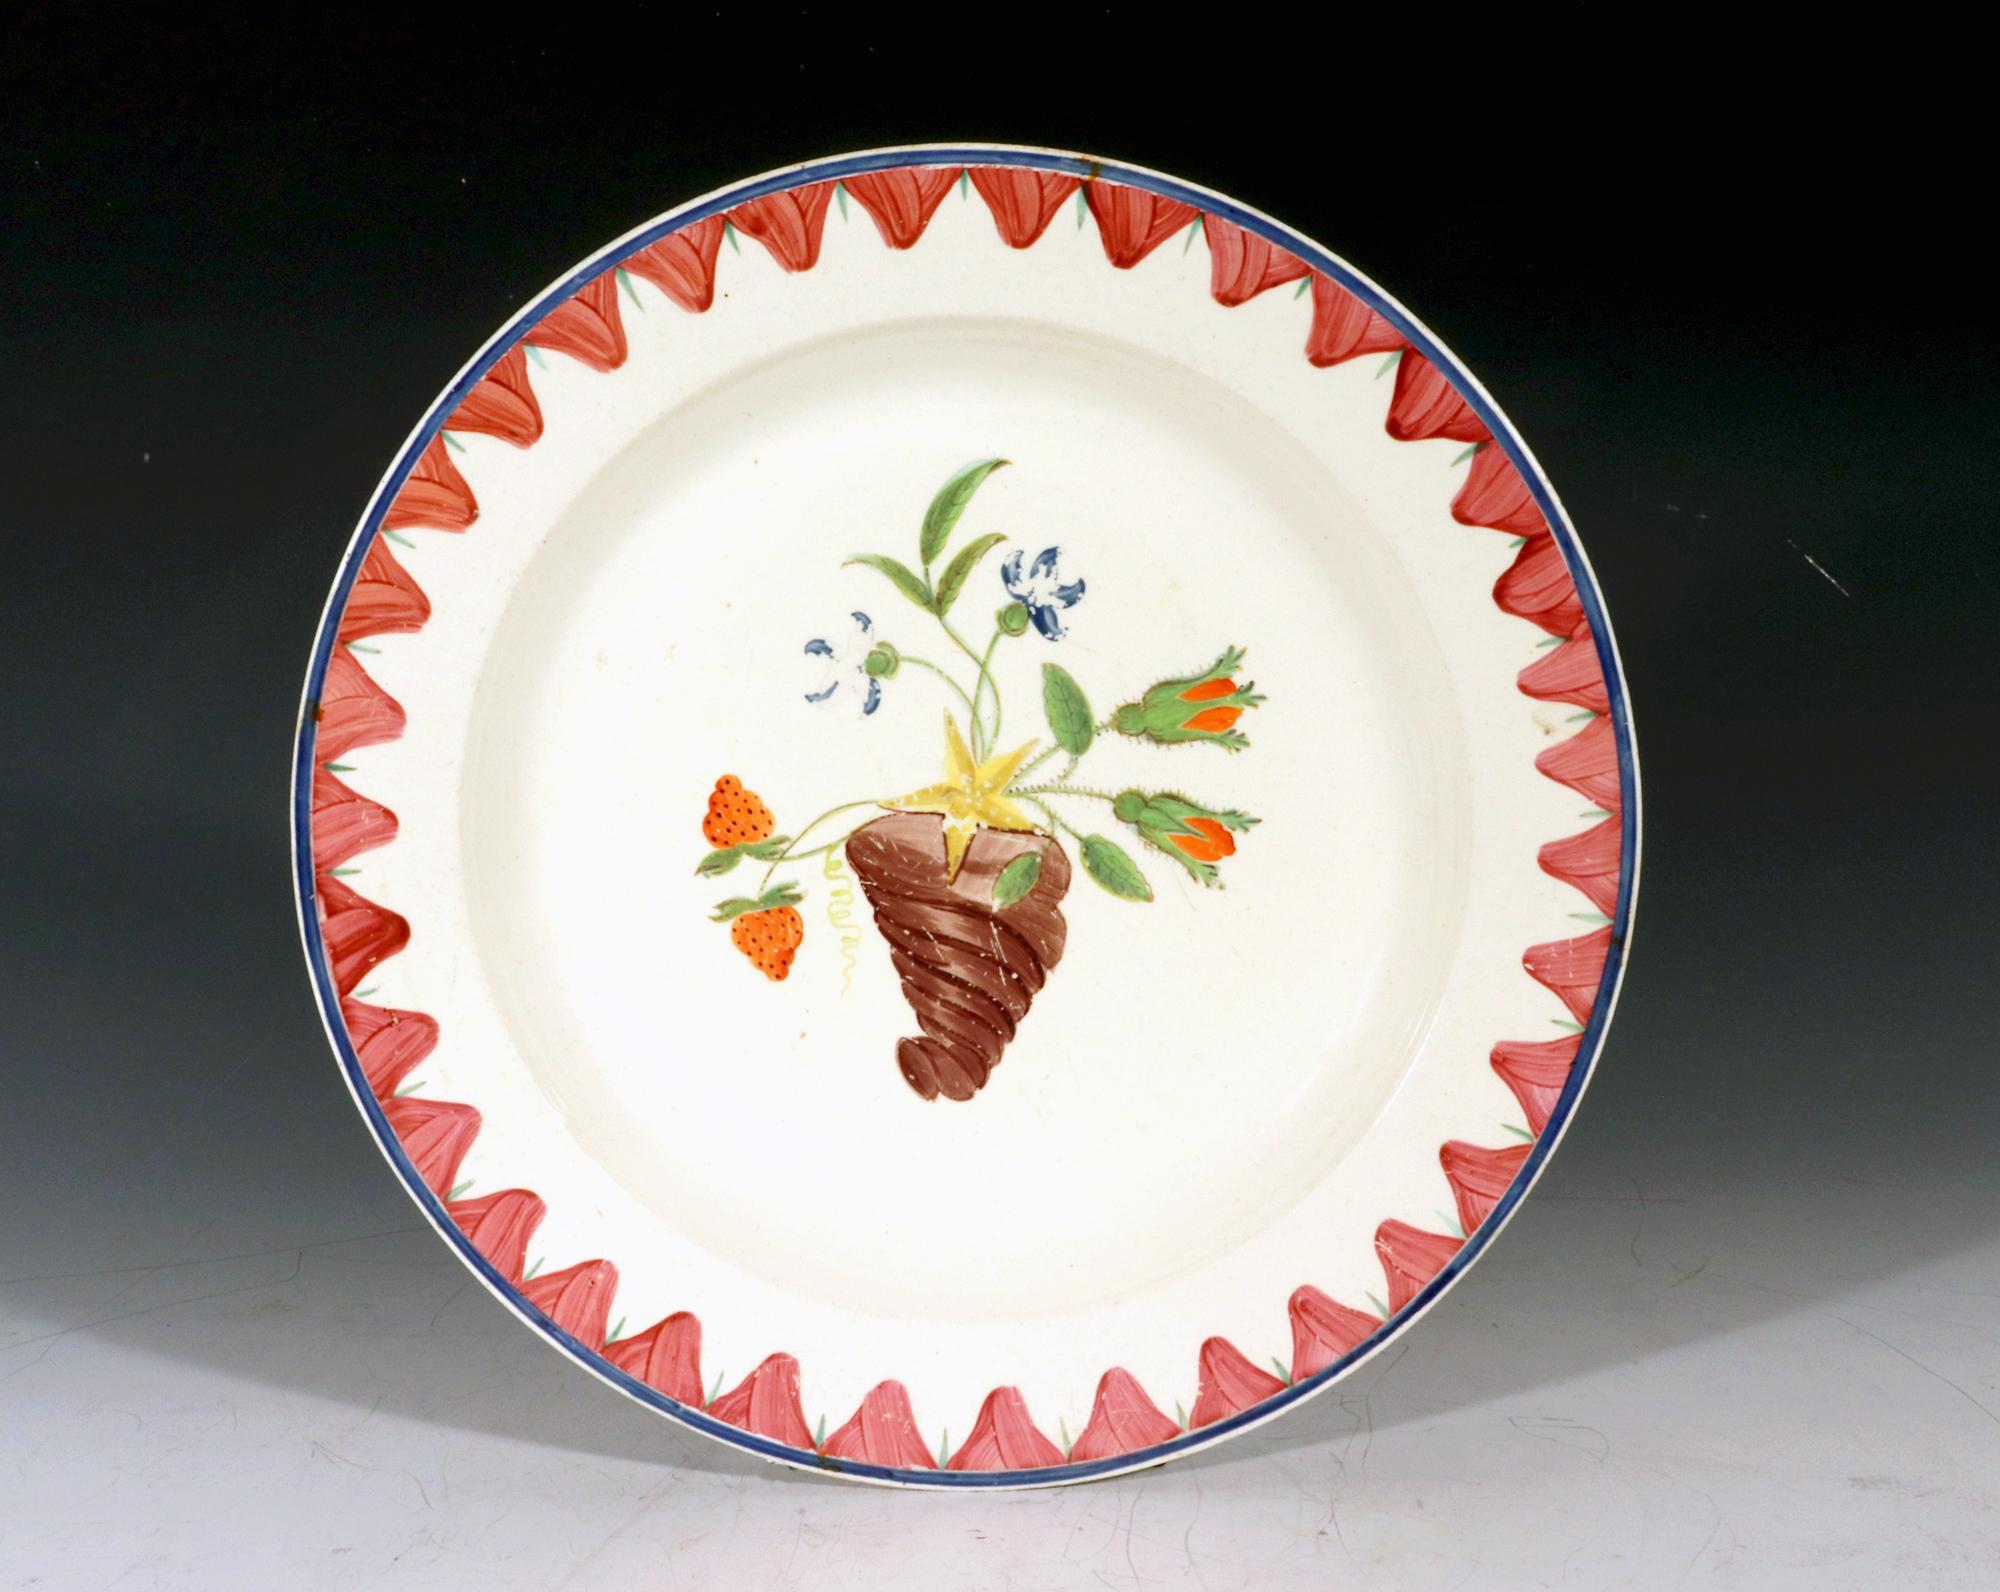 18th Century English Creamware Painted Plate,
Cornucopia of Flowers,
Circa 1780-1800

The circular creamware plat, probably with outside decoration, is painted with a cornucopia shaped vase holding flowers and leaves as well as a strawberry plant in